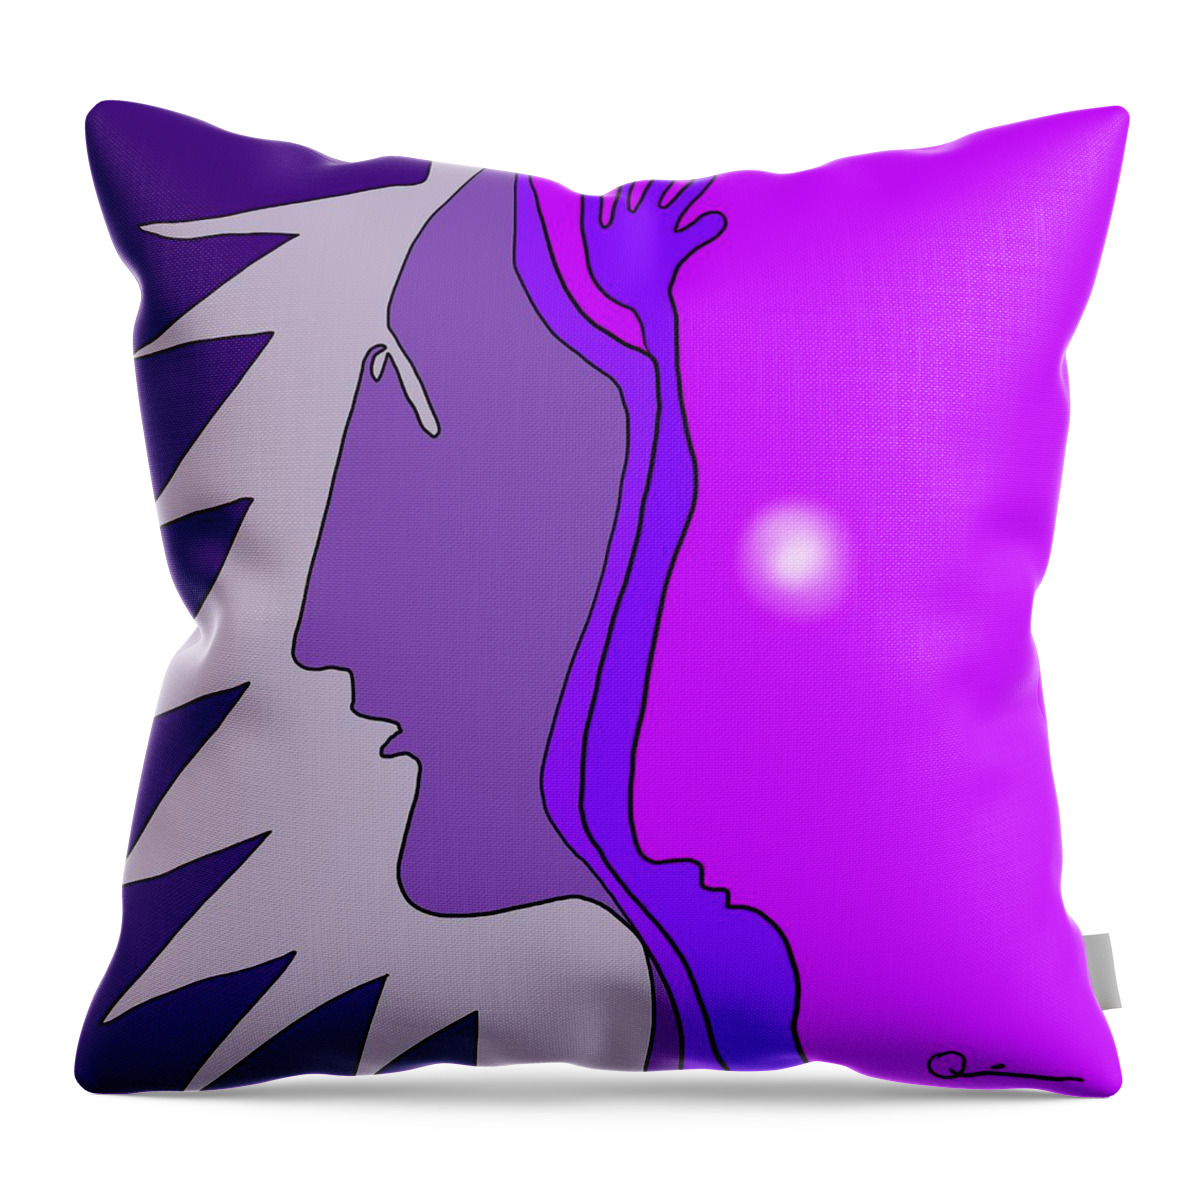 Faces Throw Pillow featuring the digital art Wise Friend by Jeffrey Quiros